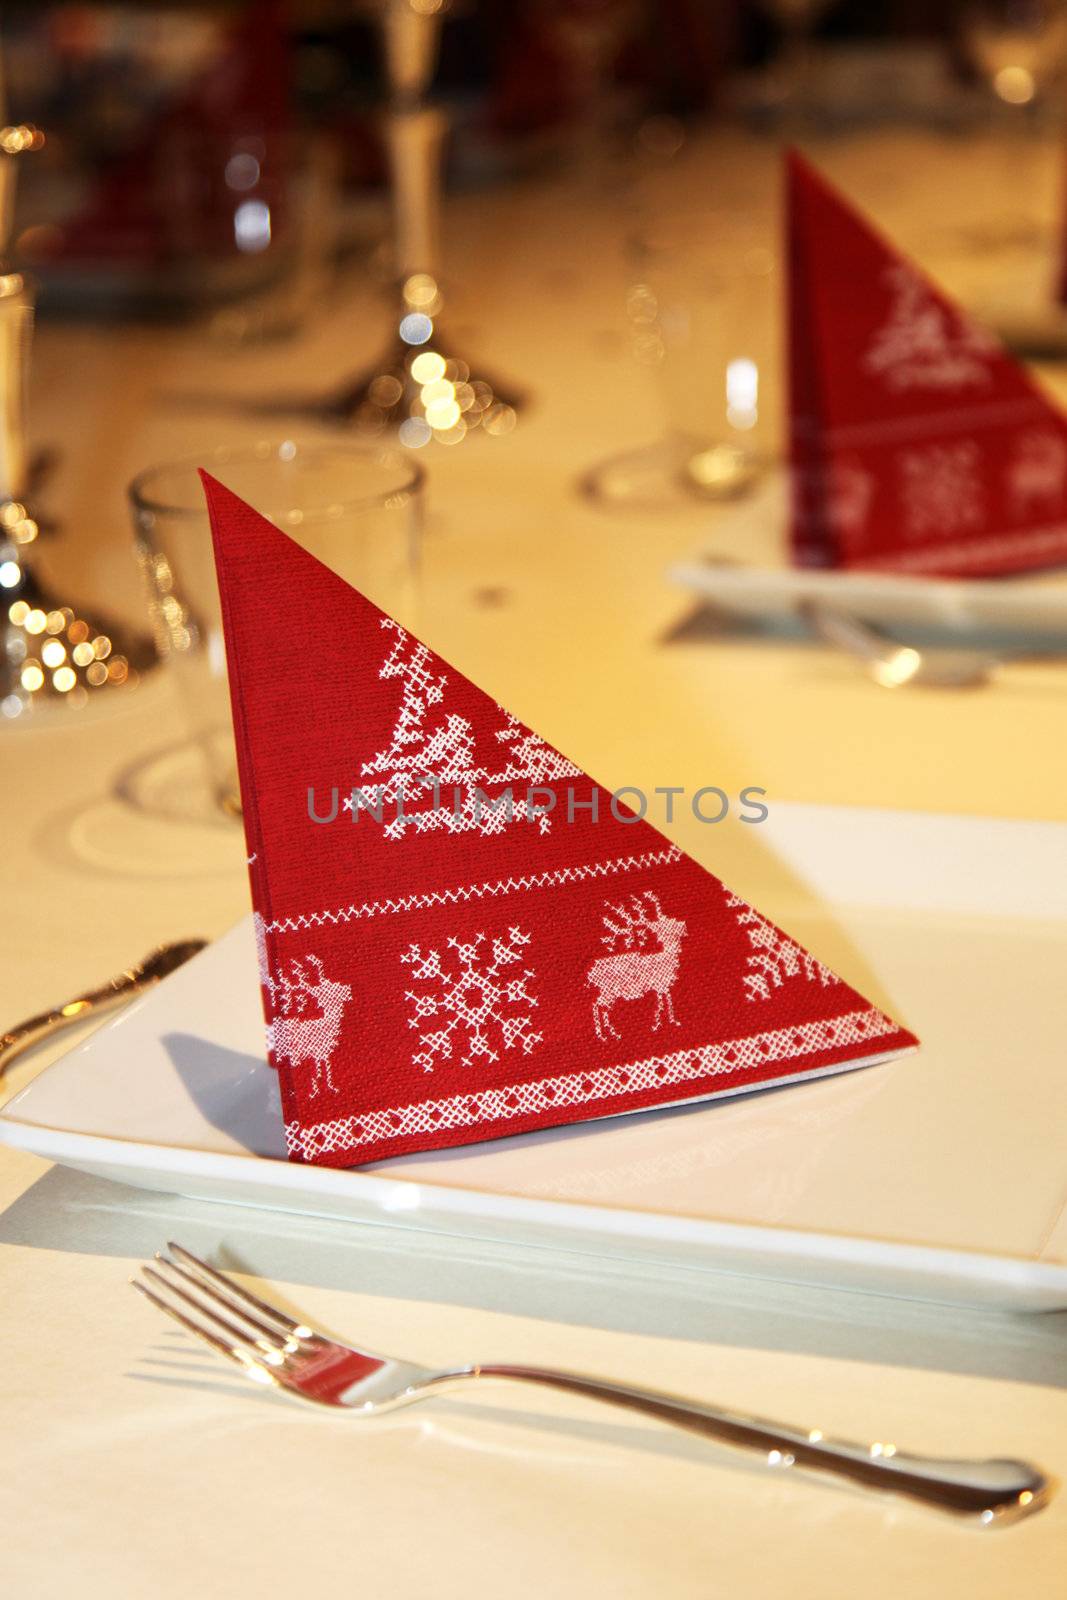 Christmas table decoration - close-up of plate-
 